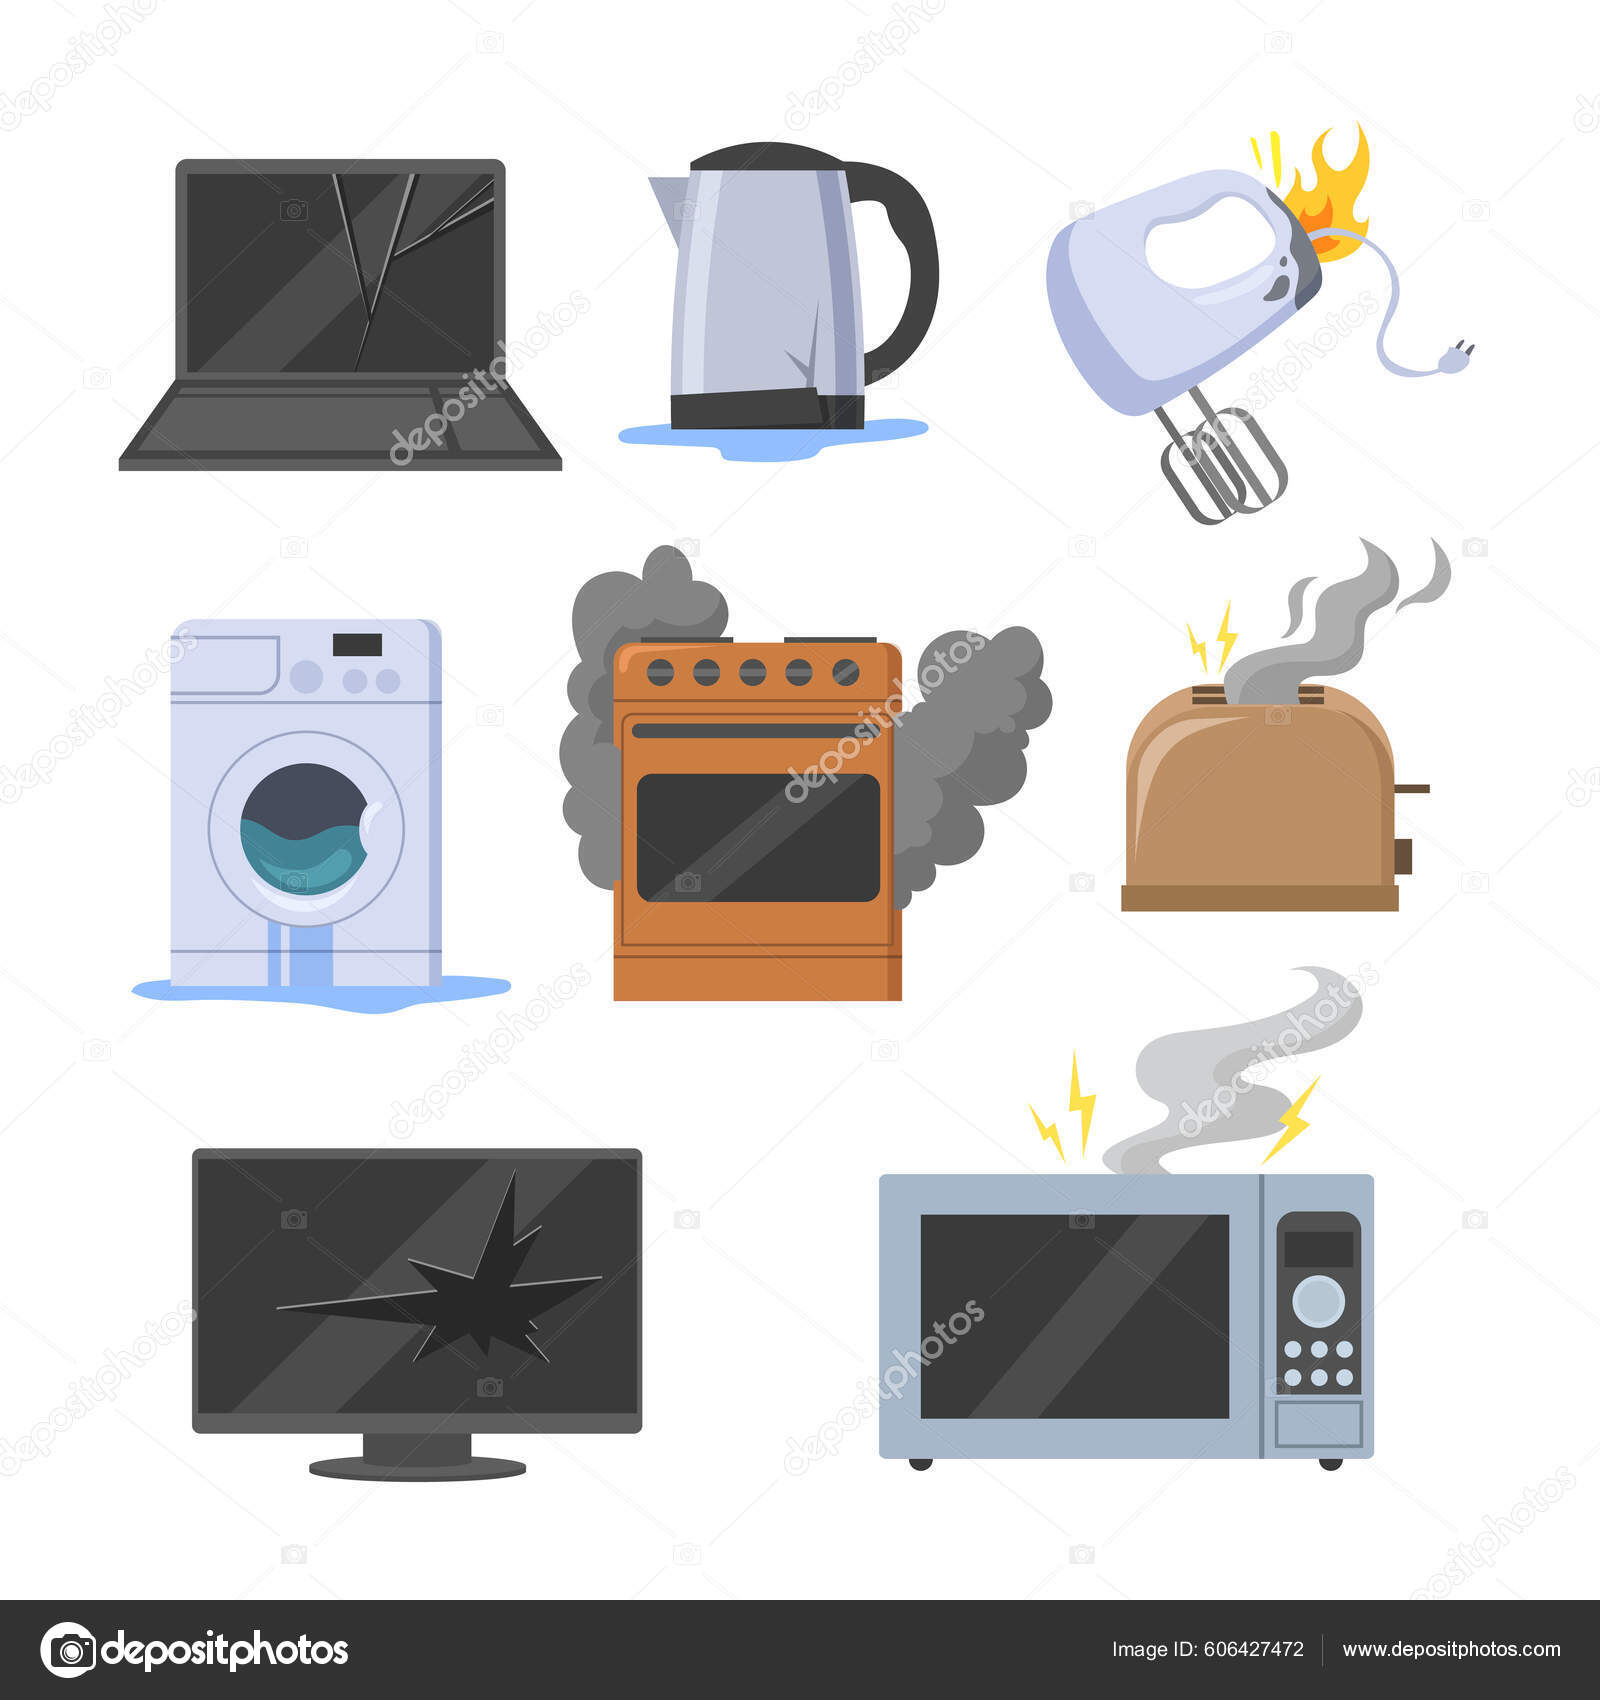 Kitchen and home electric appliances collection vector